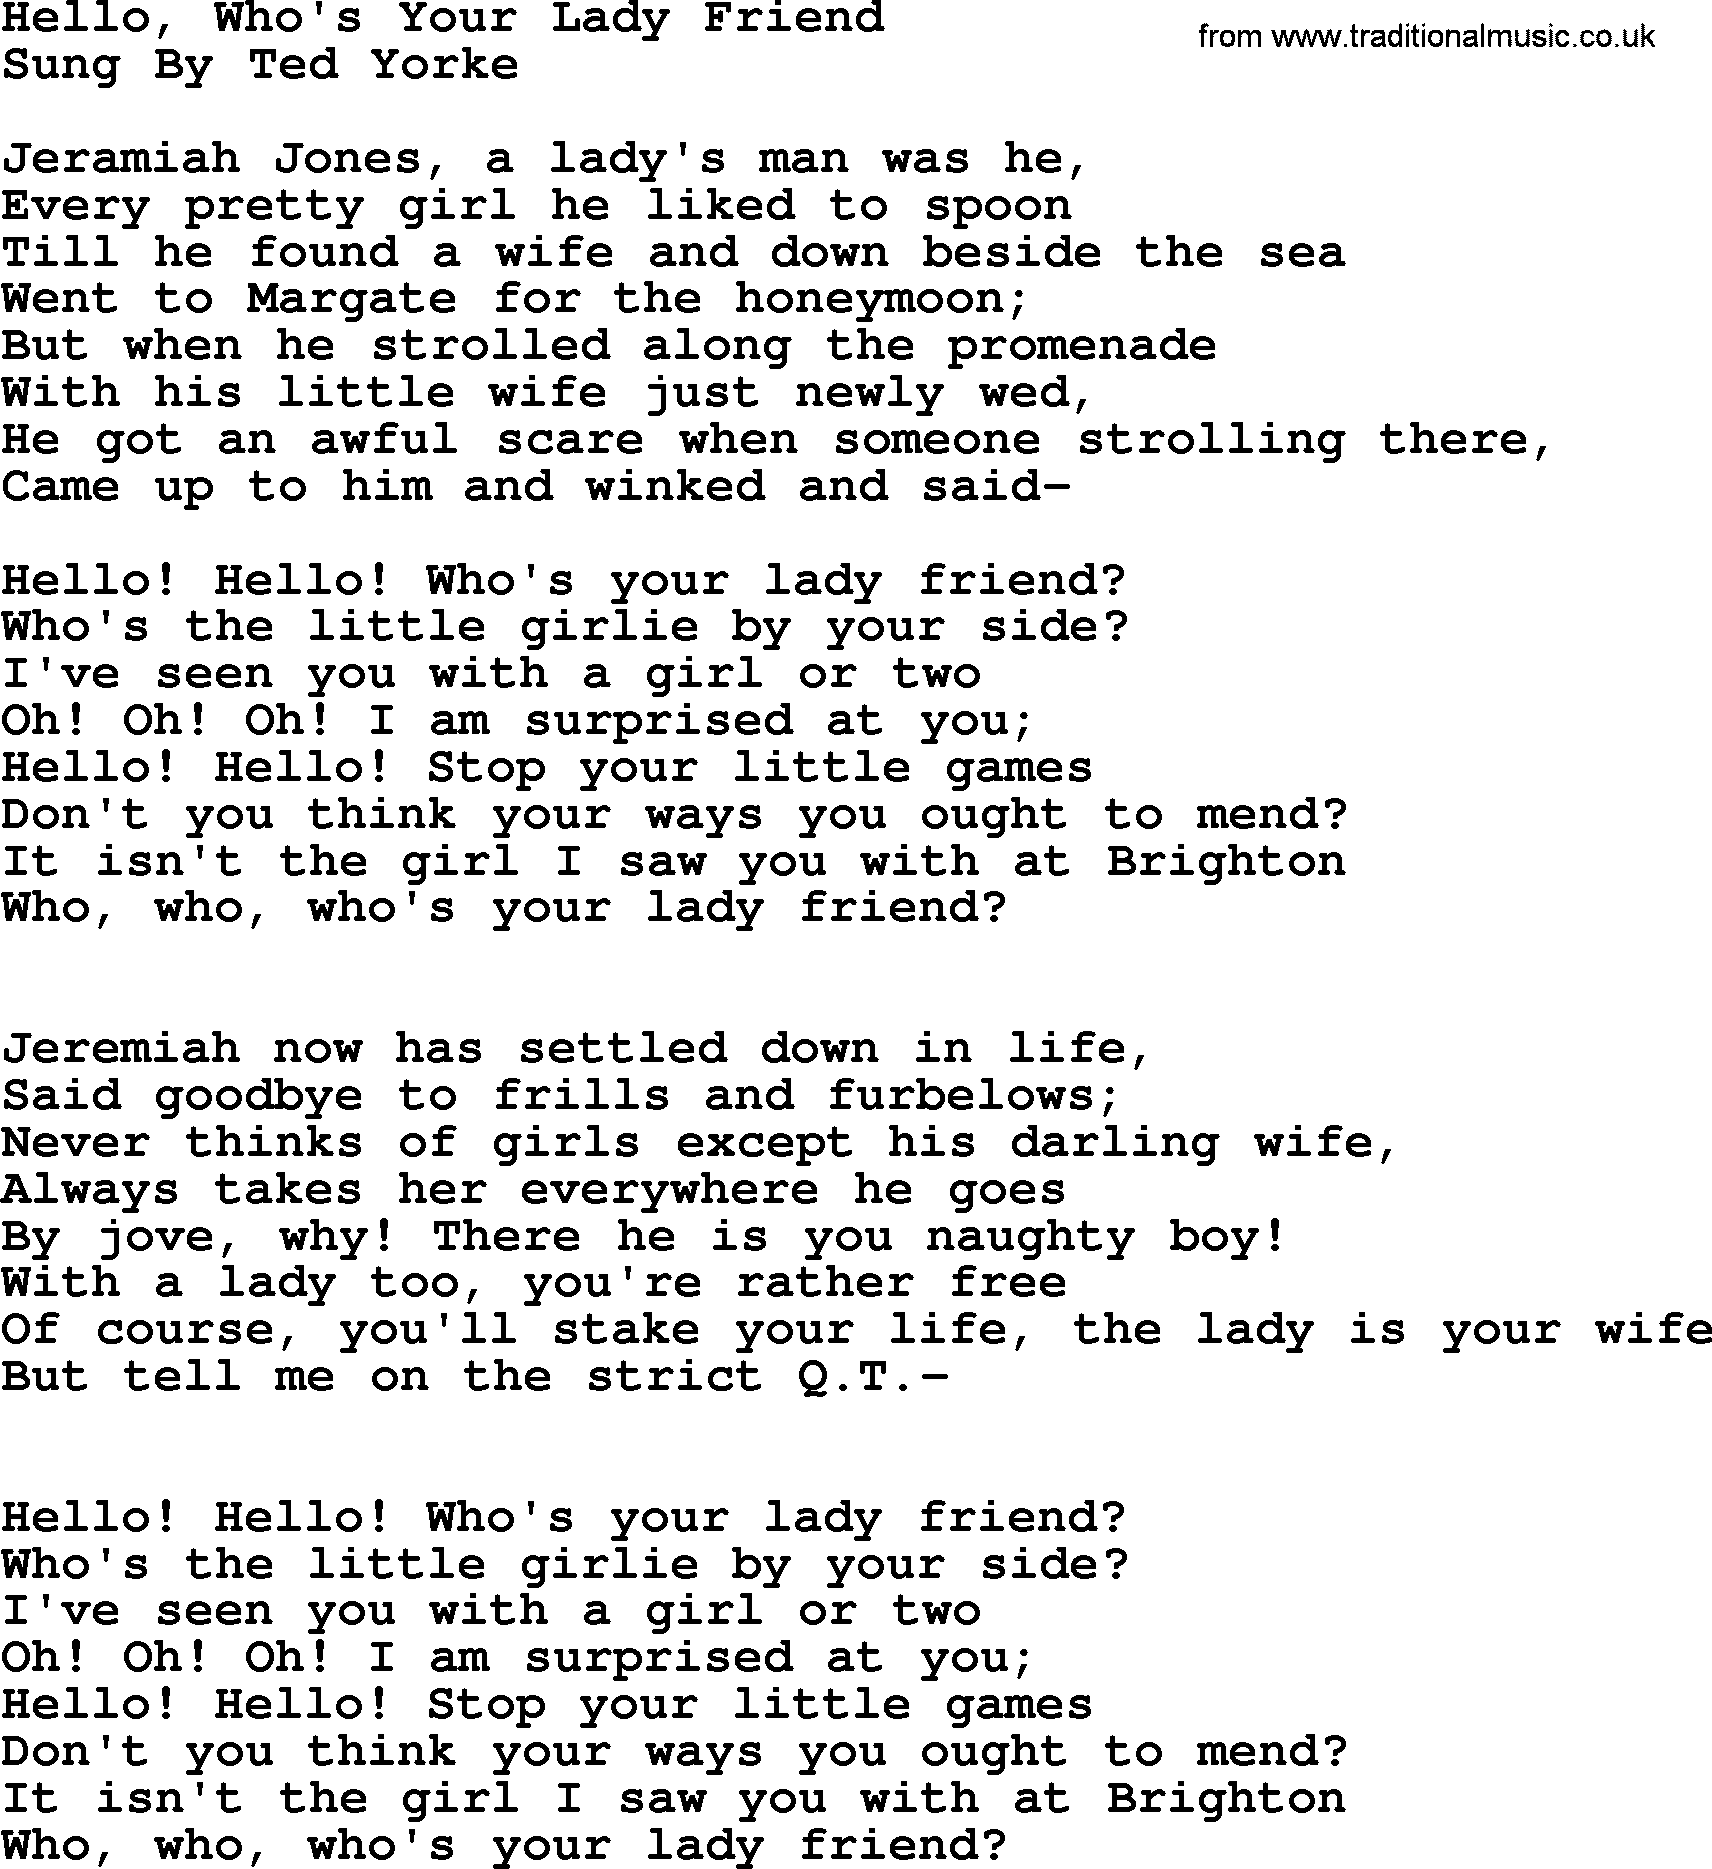 World War One Ww1 Era Song Lyrics For Hello Who S Your Lady Friend